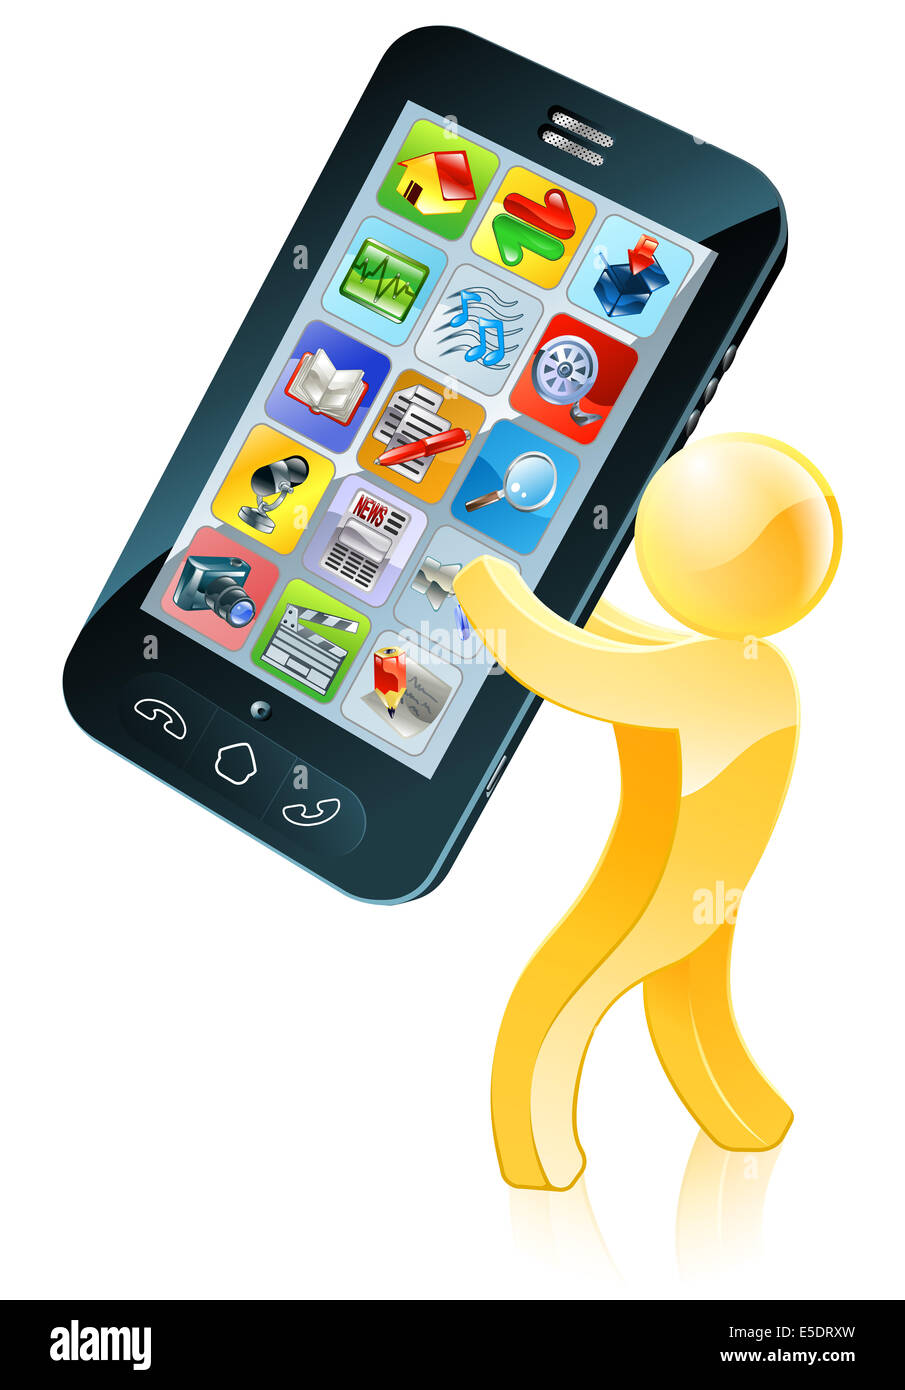 Illustration of a gold figure mascot holding a giant mobile phone Stock Photo